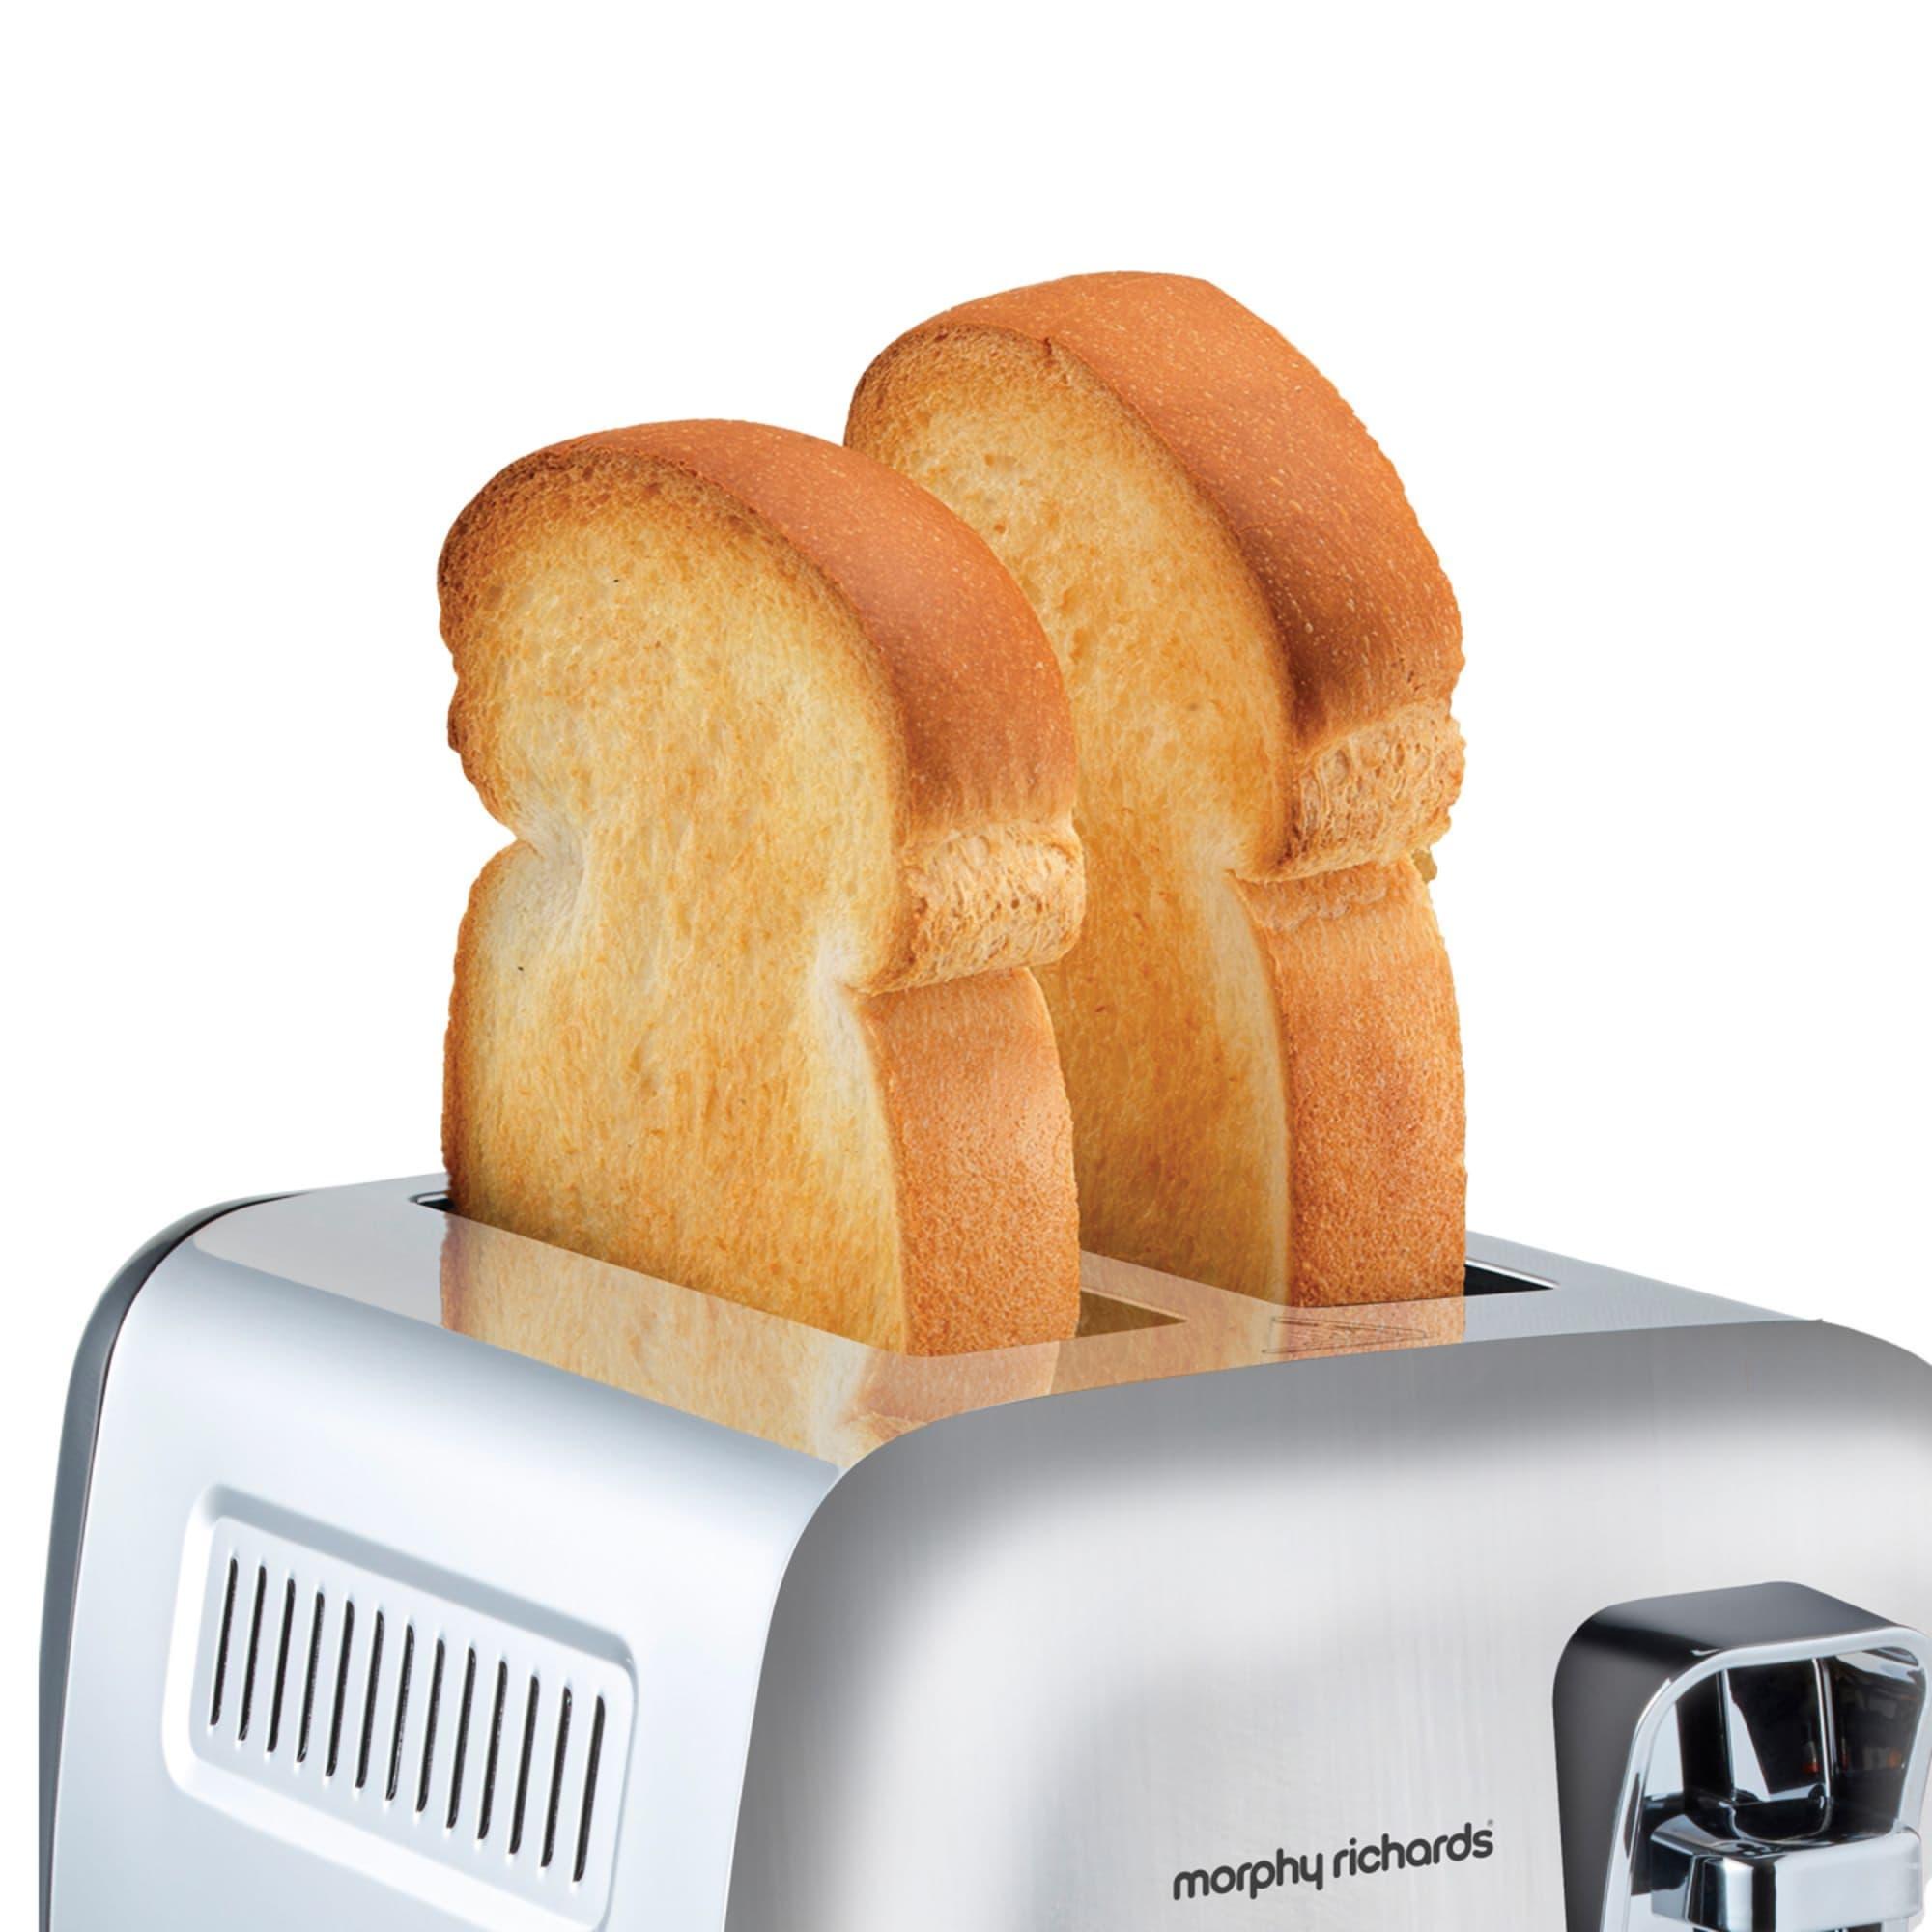 Morphy Richards Equip 2 Slice Toaster Stainless Steel Image 3